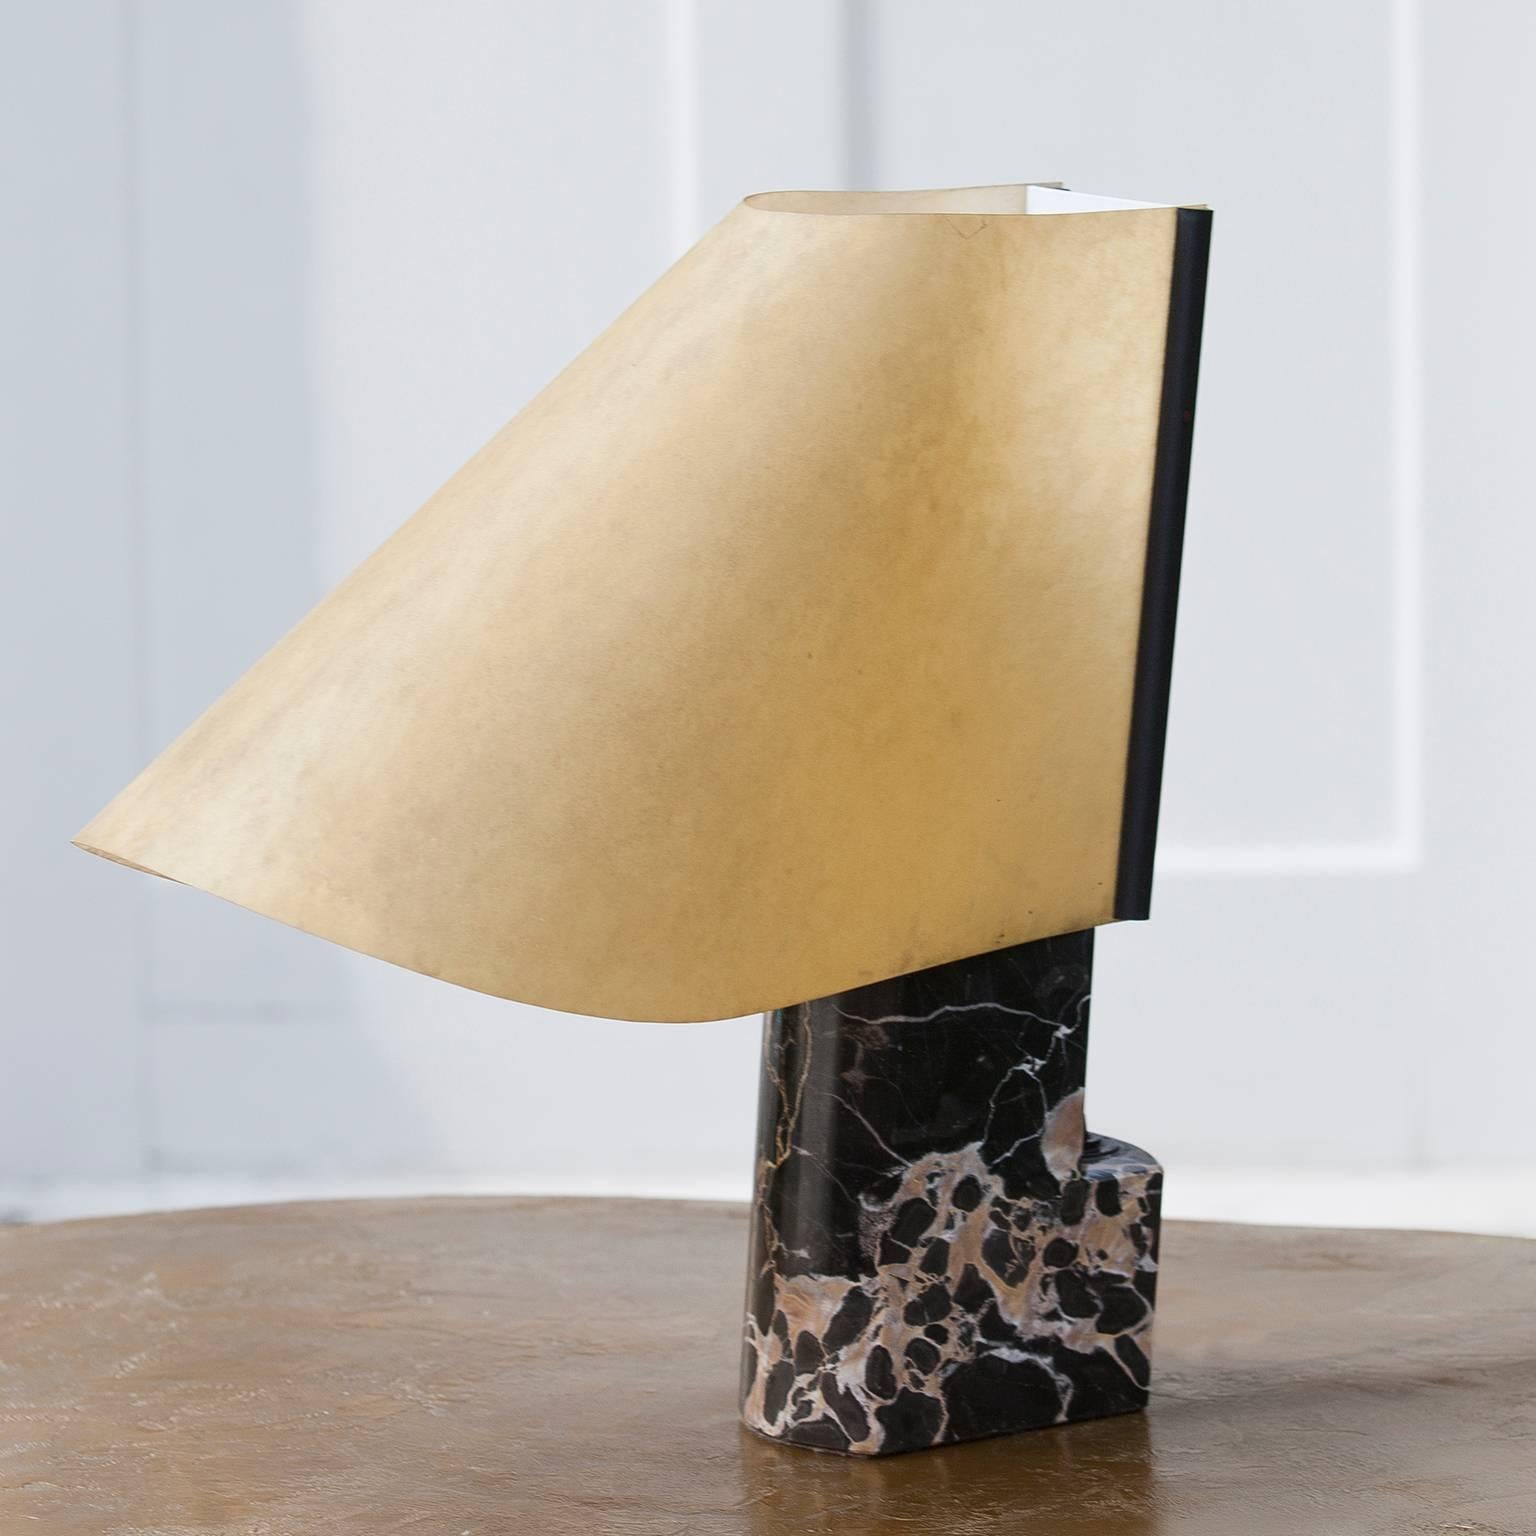 Fantastic table lamp by Stilnovo from the 1960 attributed to Gino Sarfatti.
Measures: H 44 x W 42.5 x D 23 cm.